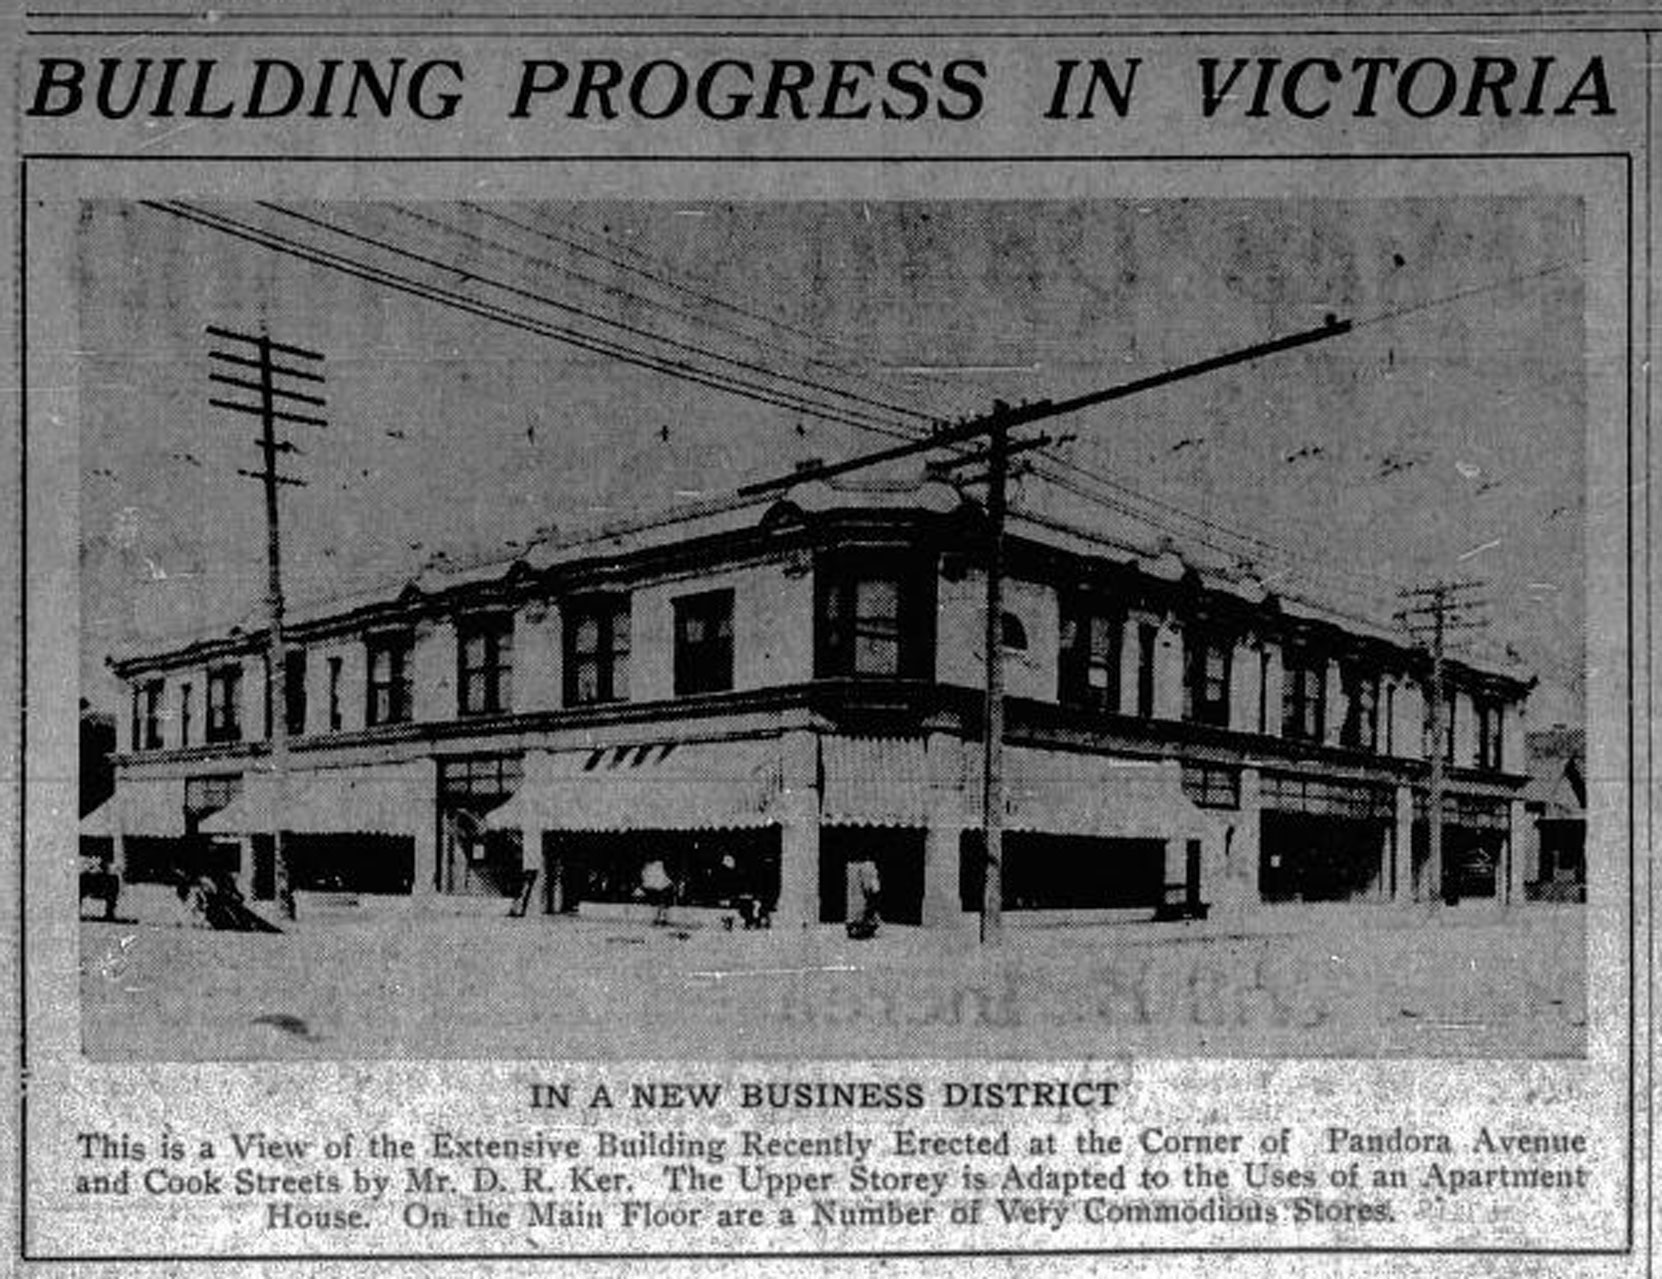 1912 Victoria newspaper report about 1050-1058 Pandora Avenue / 1508-1516 Cooks Street, built for David Russell Ker by architect William Ridgway Wilson